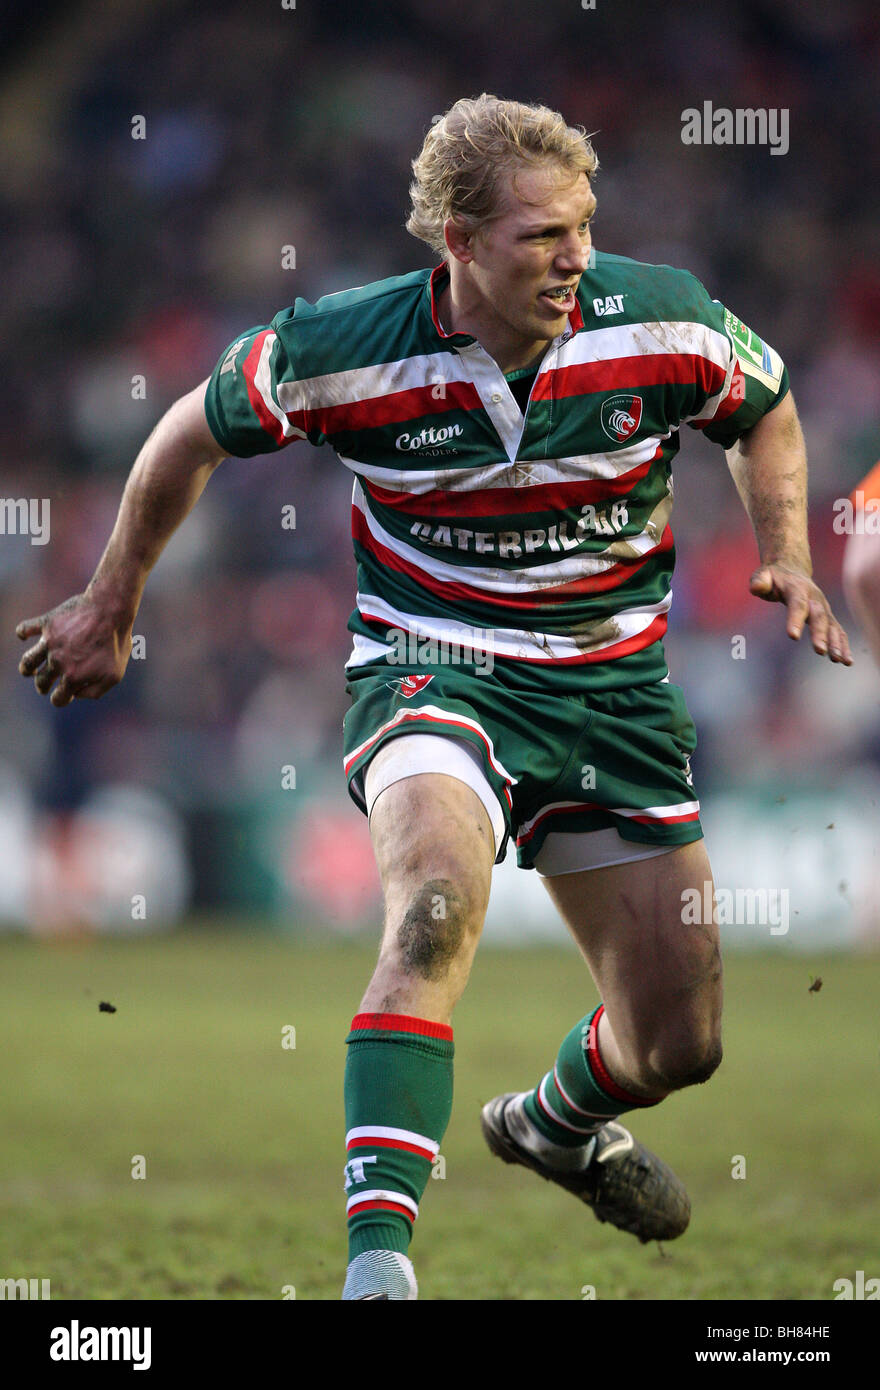 LEWIS MOODY LEICESTER TIGERS RU WELFORD ROAD LEICESTER ENGLAND 16.01.2010 Stockfoto